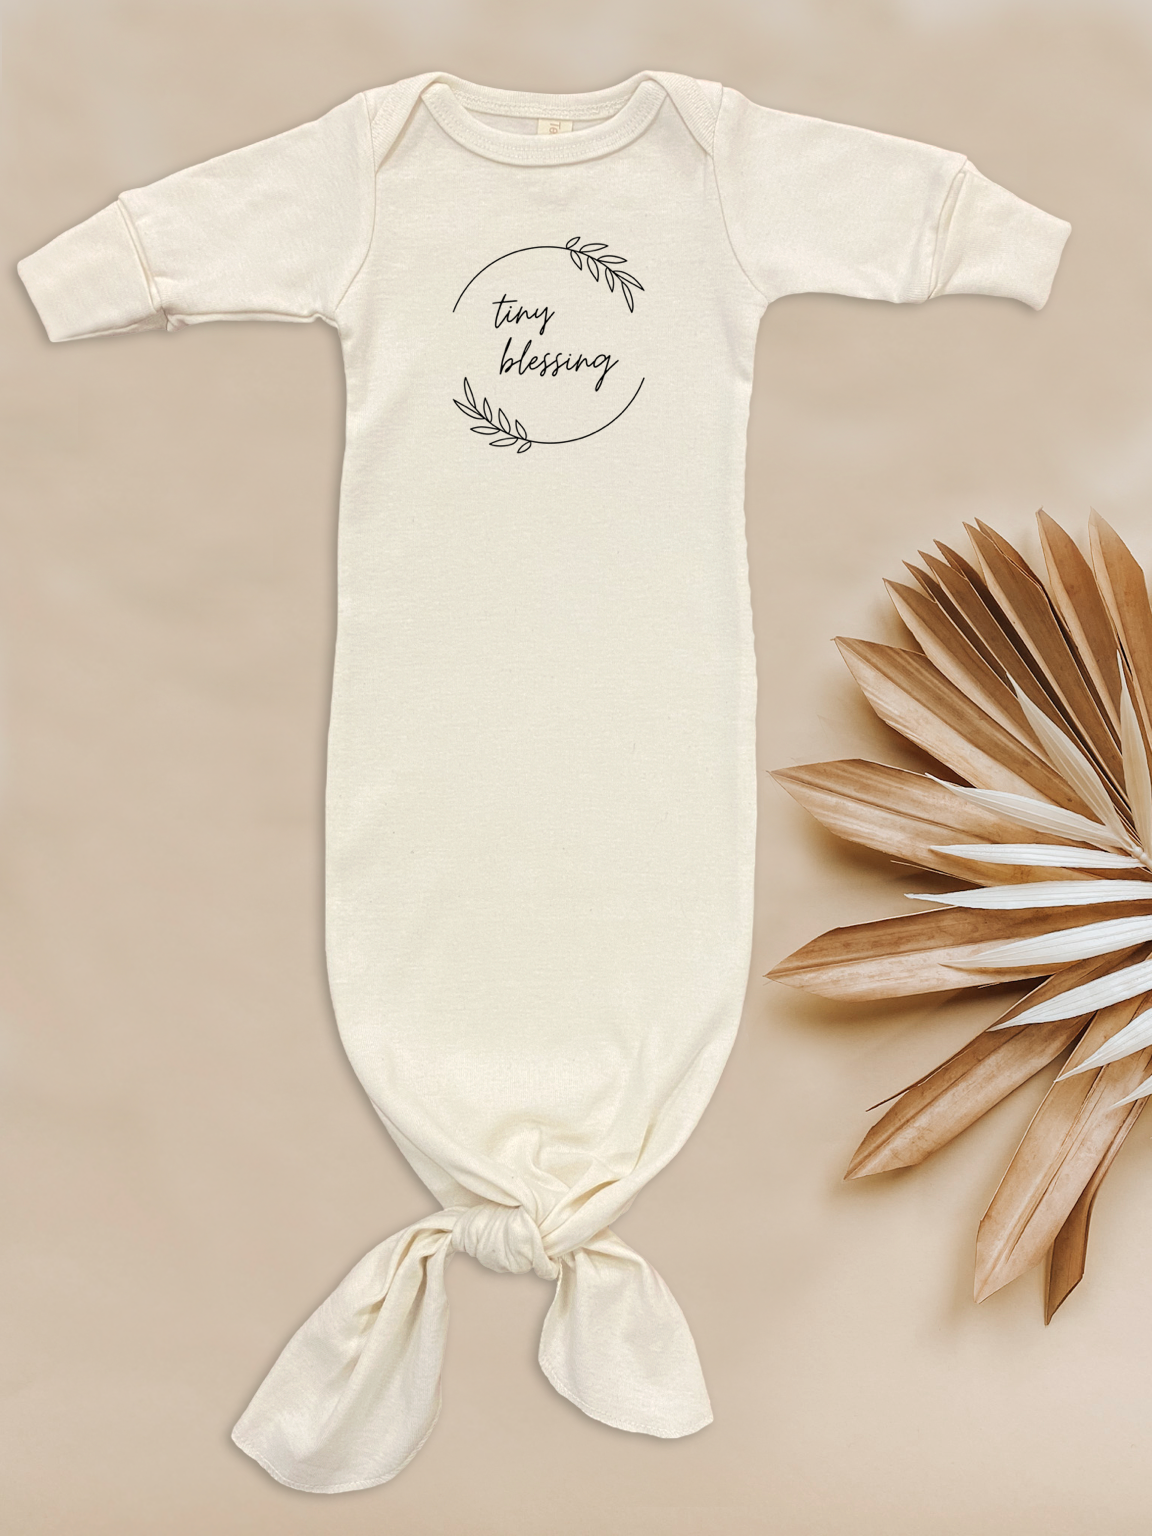 Tiny Blessing - Organic Cotton Infant Tie Gown